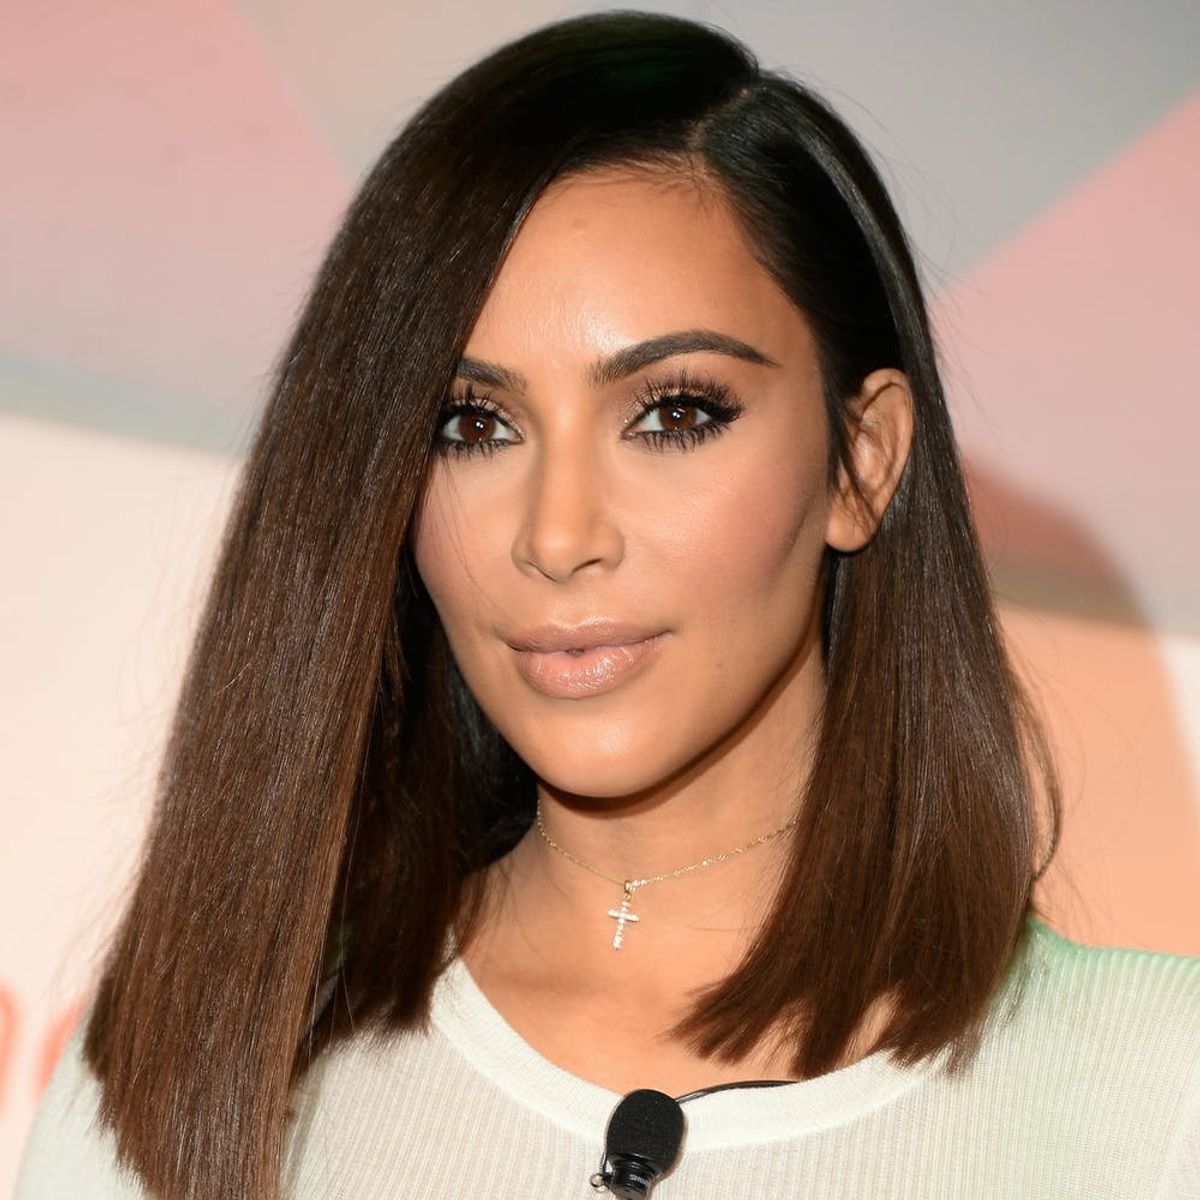 This Is the One Word Kim Kardashian West Wishes You Wouldn’t Call Her